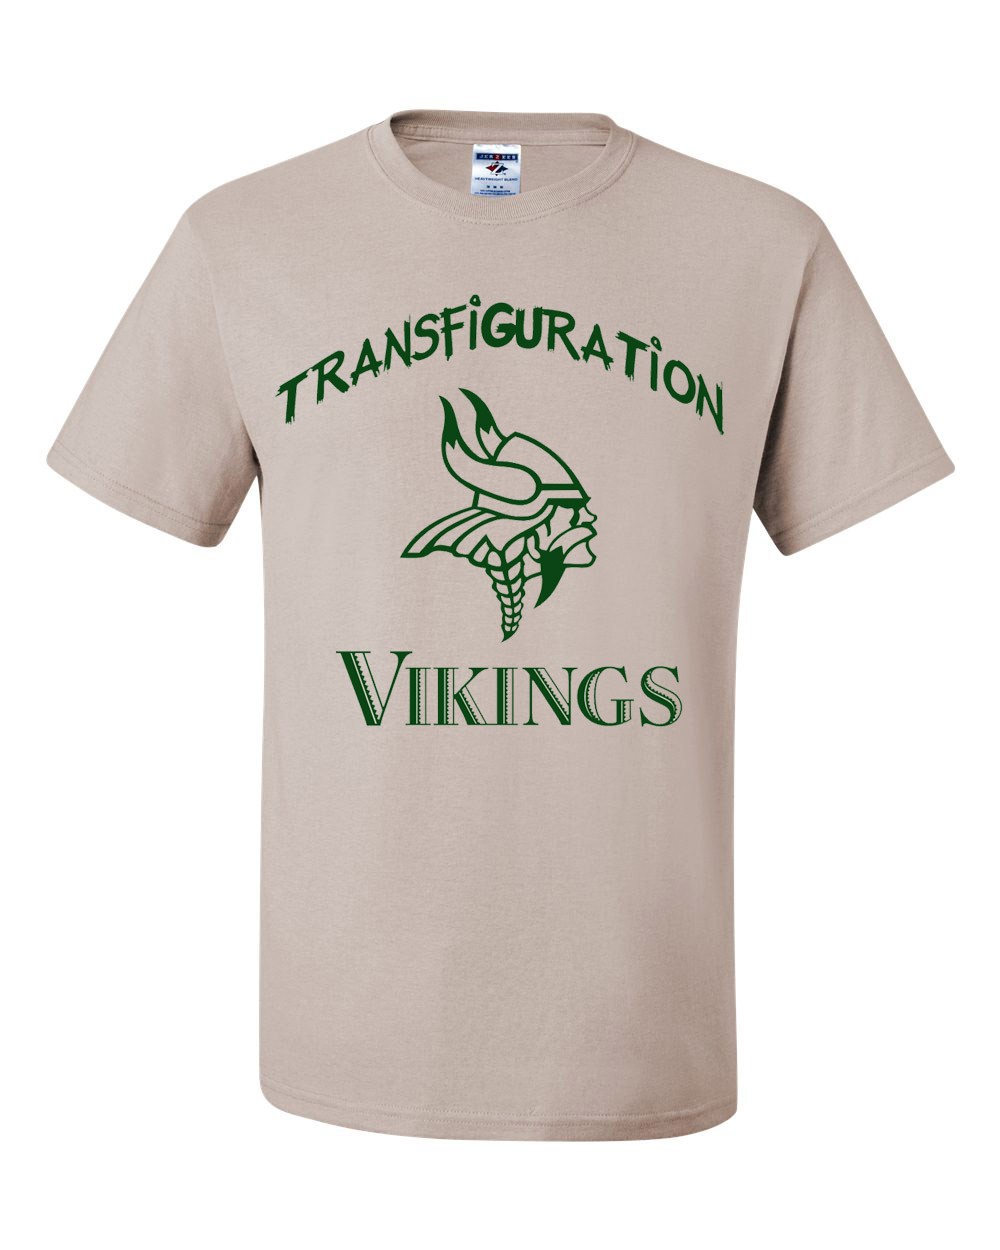 Transfiguration Be Transformed S/S Spirit T-Shirt w/ Logo - Please Allow 2-3 Weeks for Delivery